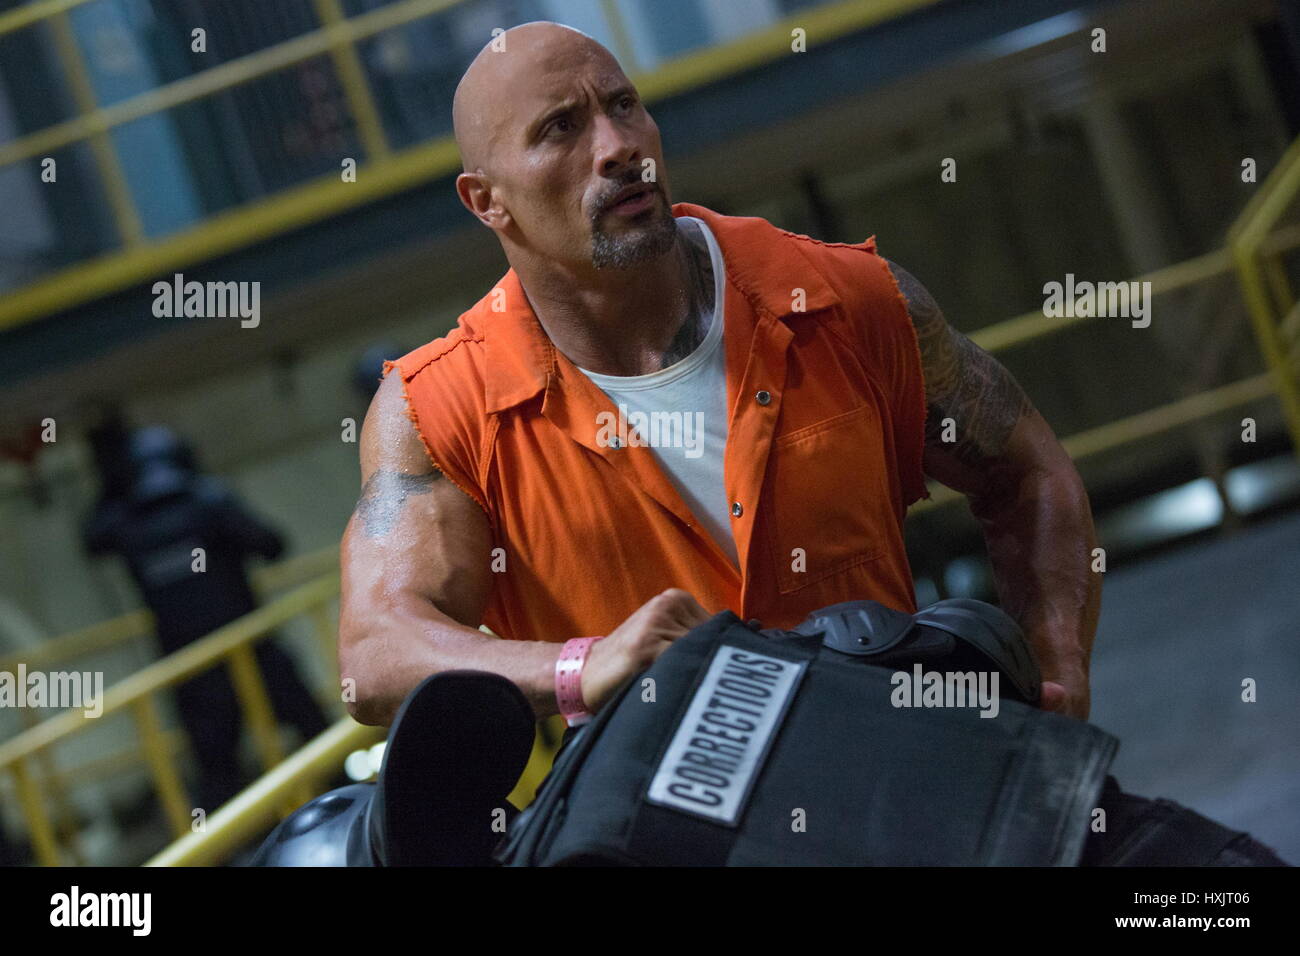 RELEASE DATE: April 14, 2017 TITLE: The Fate of the Furious STUDIO: Universal Pictures DIRECTOR: F. Gary Gray PLOT: When a mysterious woman seduces Dom into the world of crime and a betrayal of those closest to him, the crew face trials that will test them as never before PICTURED: Dwayne Johnson as Hobbs. (Credit Image: © Universal Pictures/Entertainment Pictures) Stock Photo